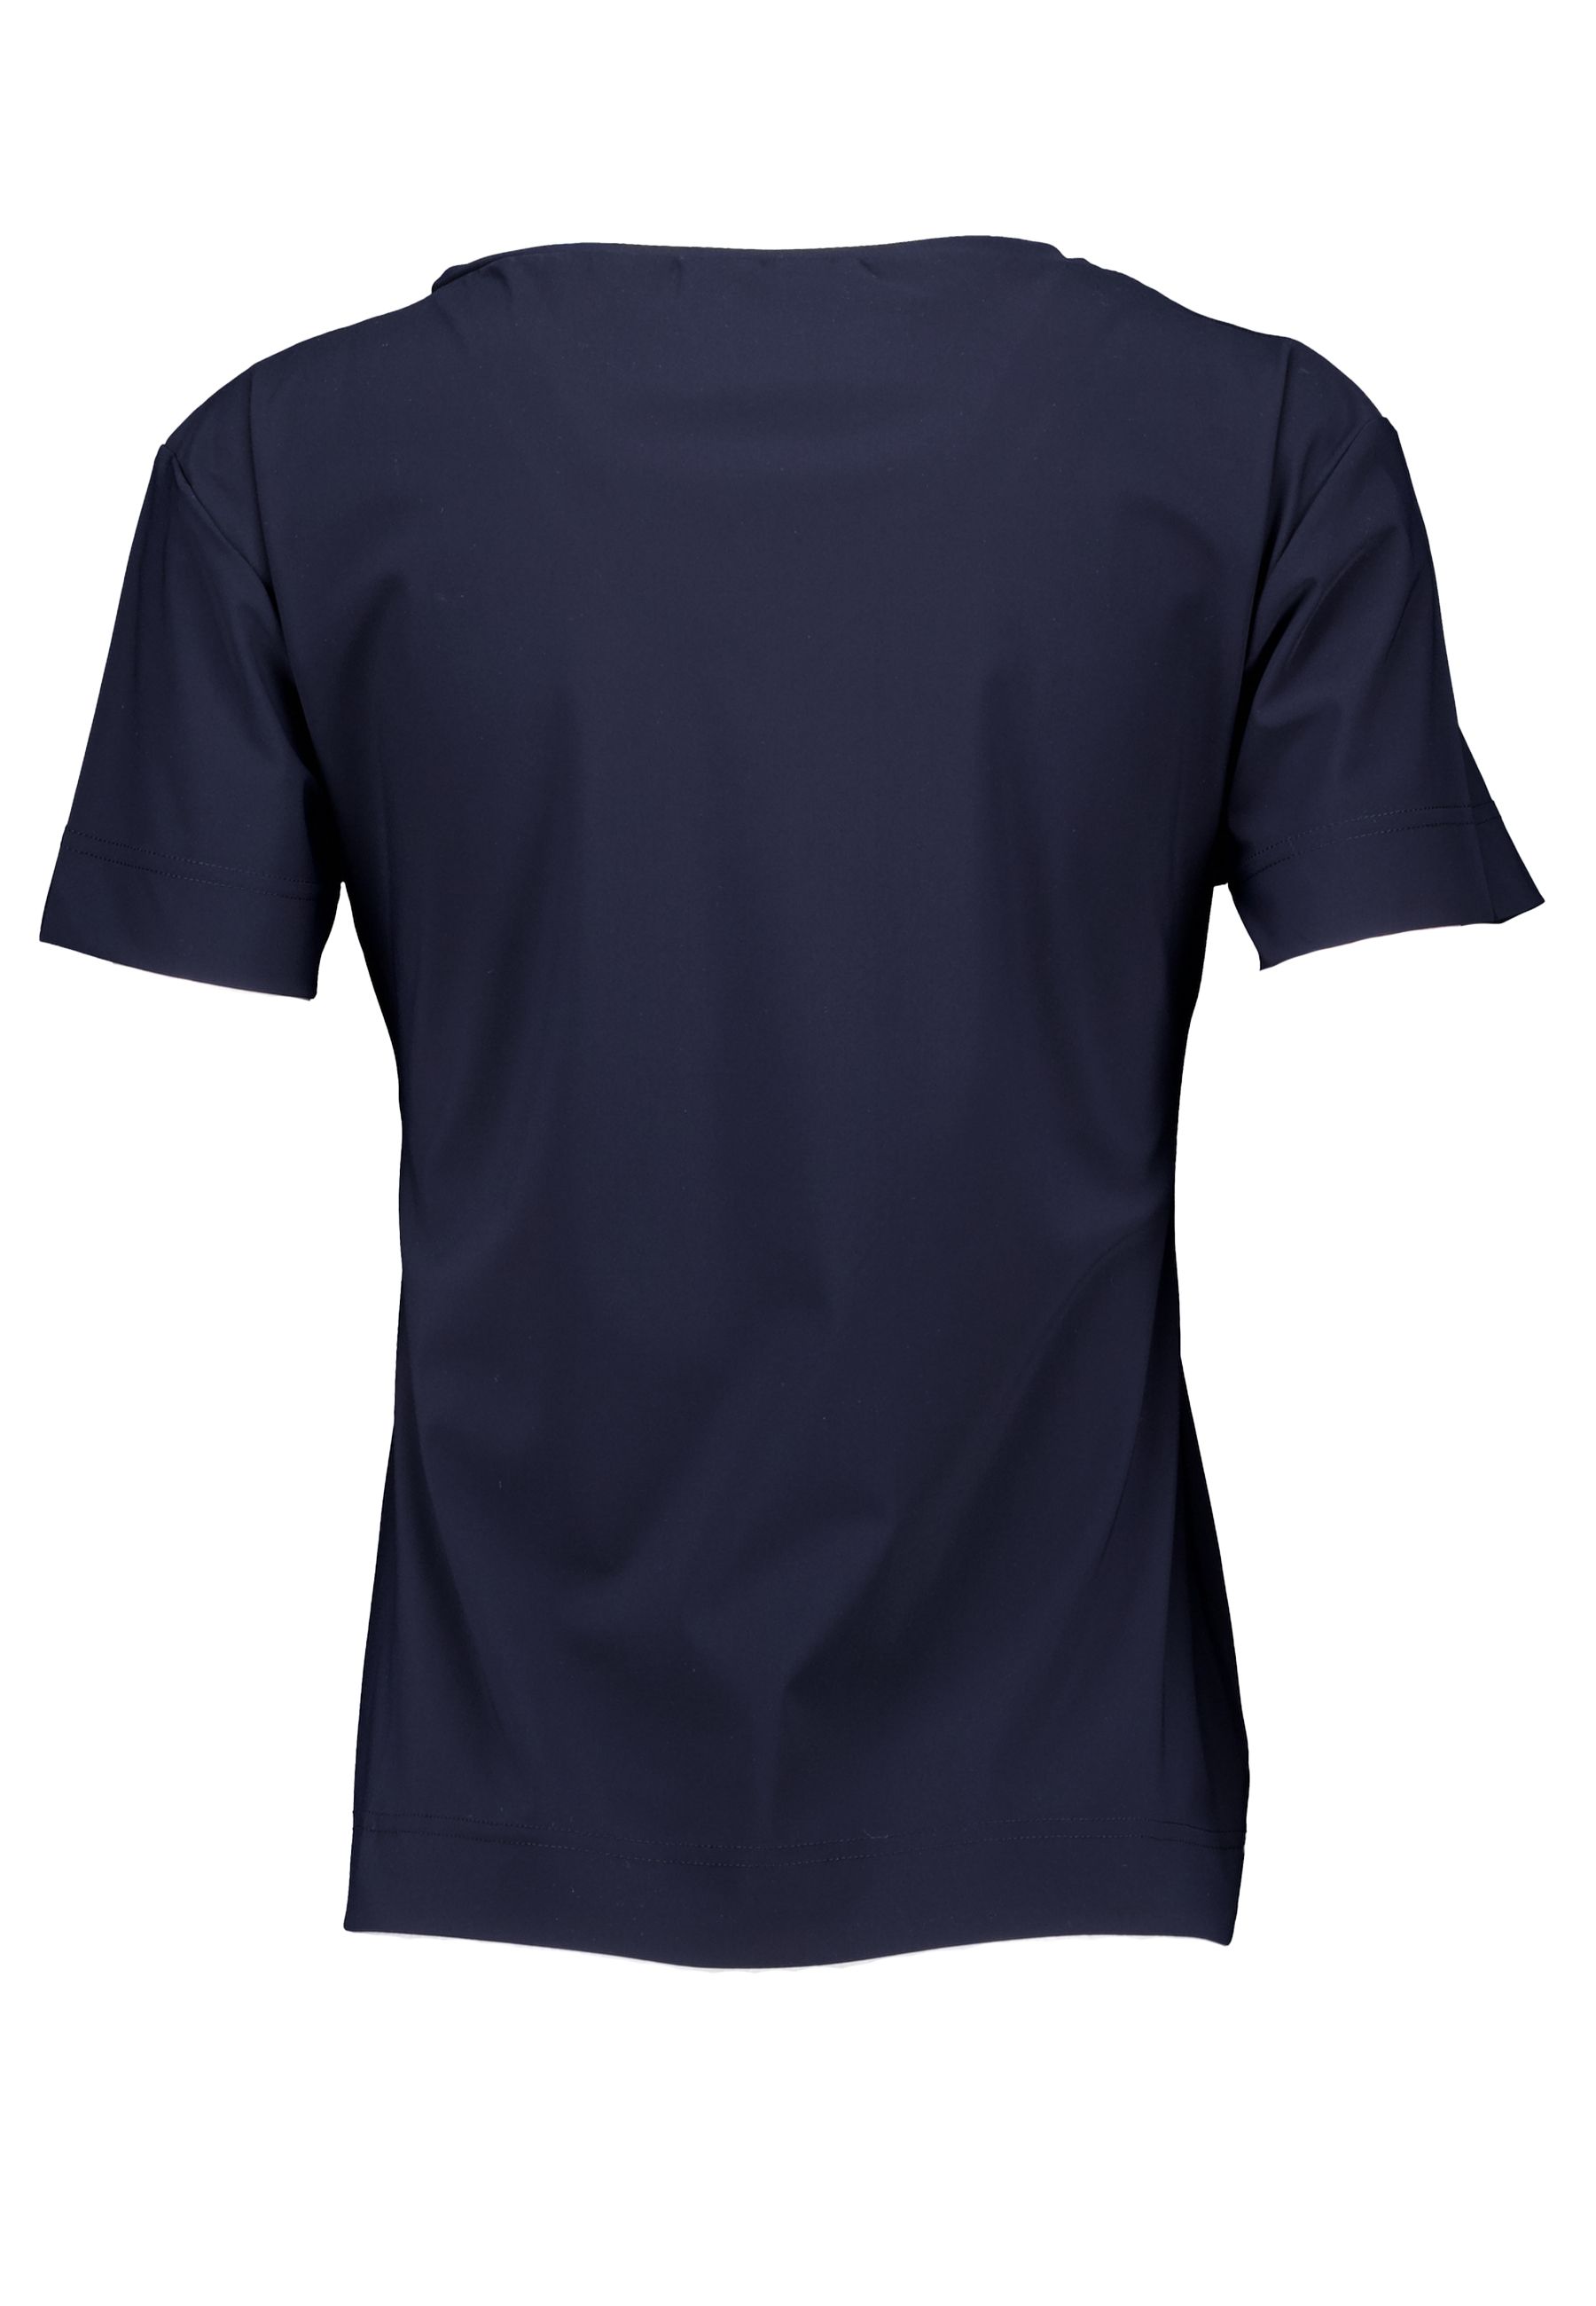 Roller t-shirts donkerblauw